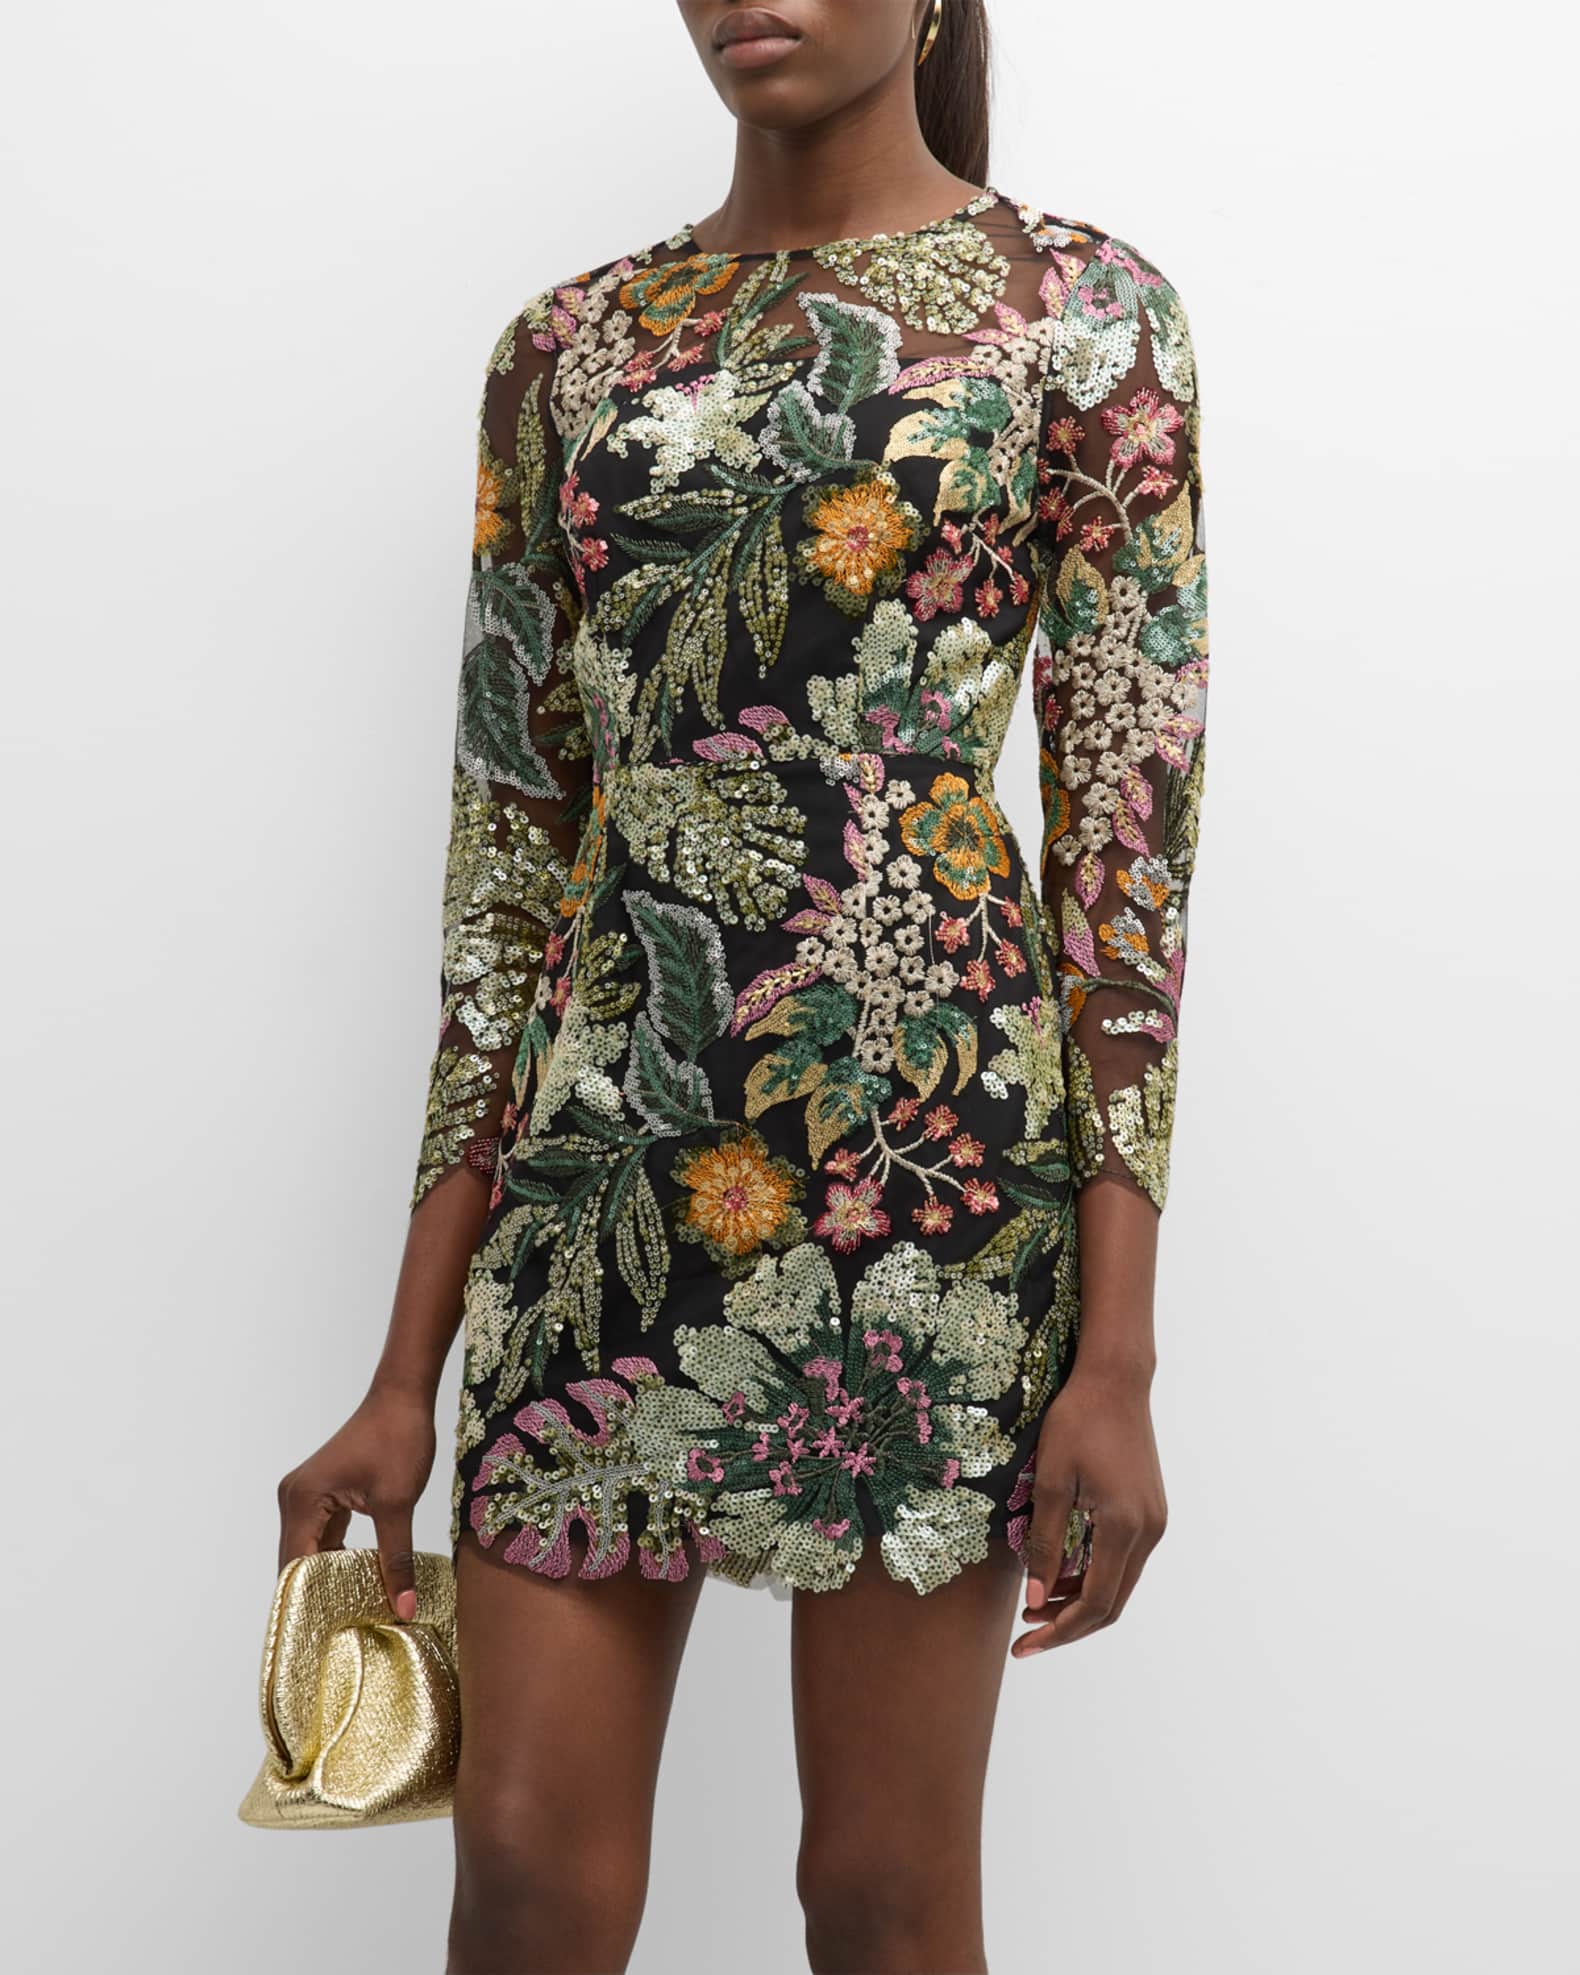 Milly Scottie Sequin Floral-Embroidered Mini Dress | Neiman Marcus